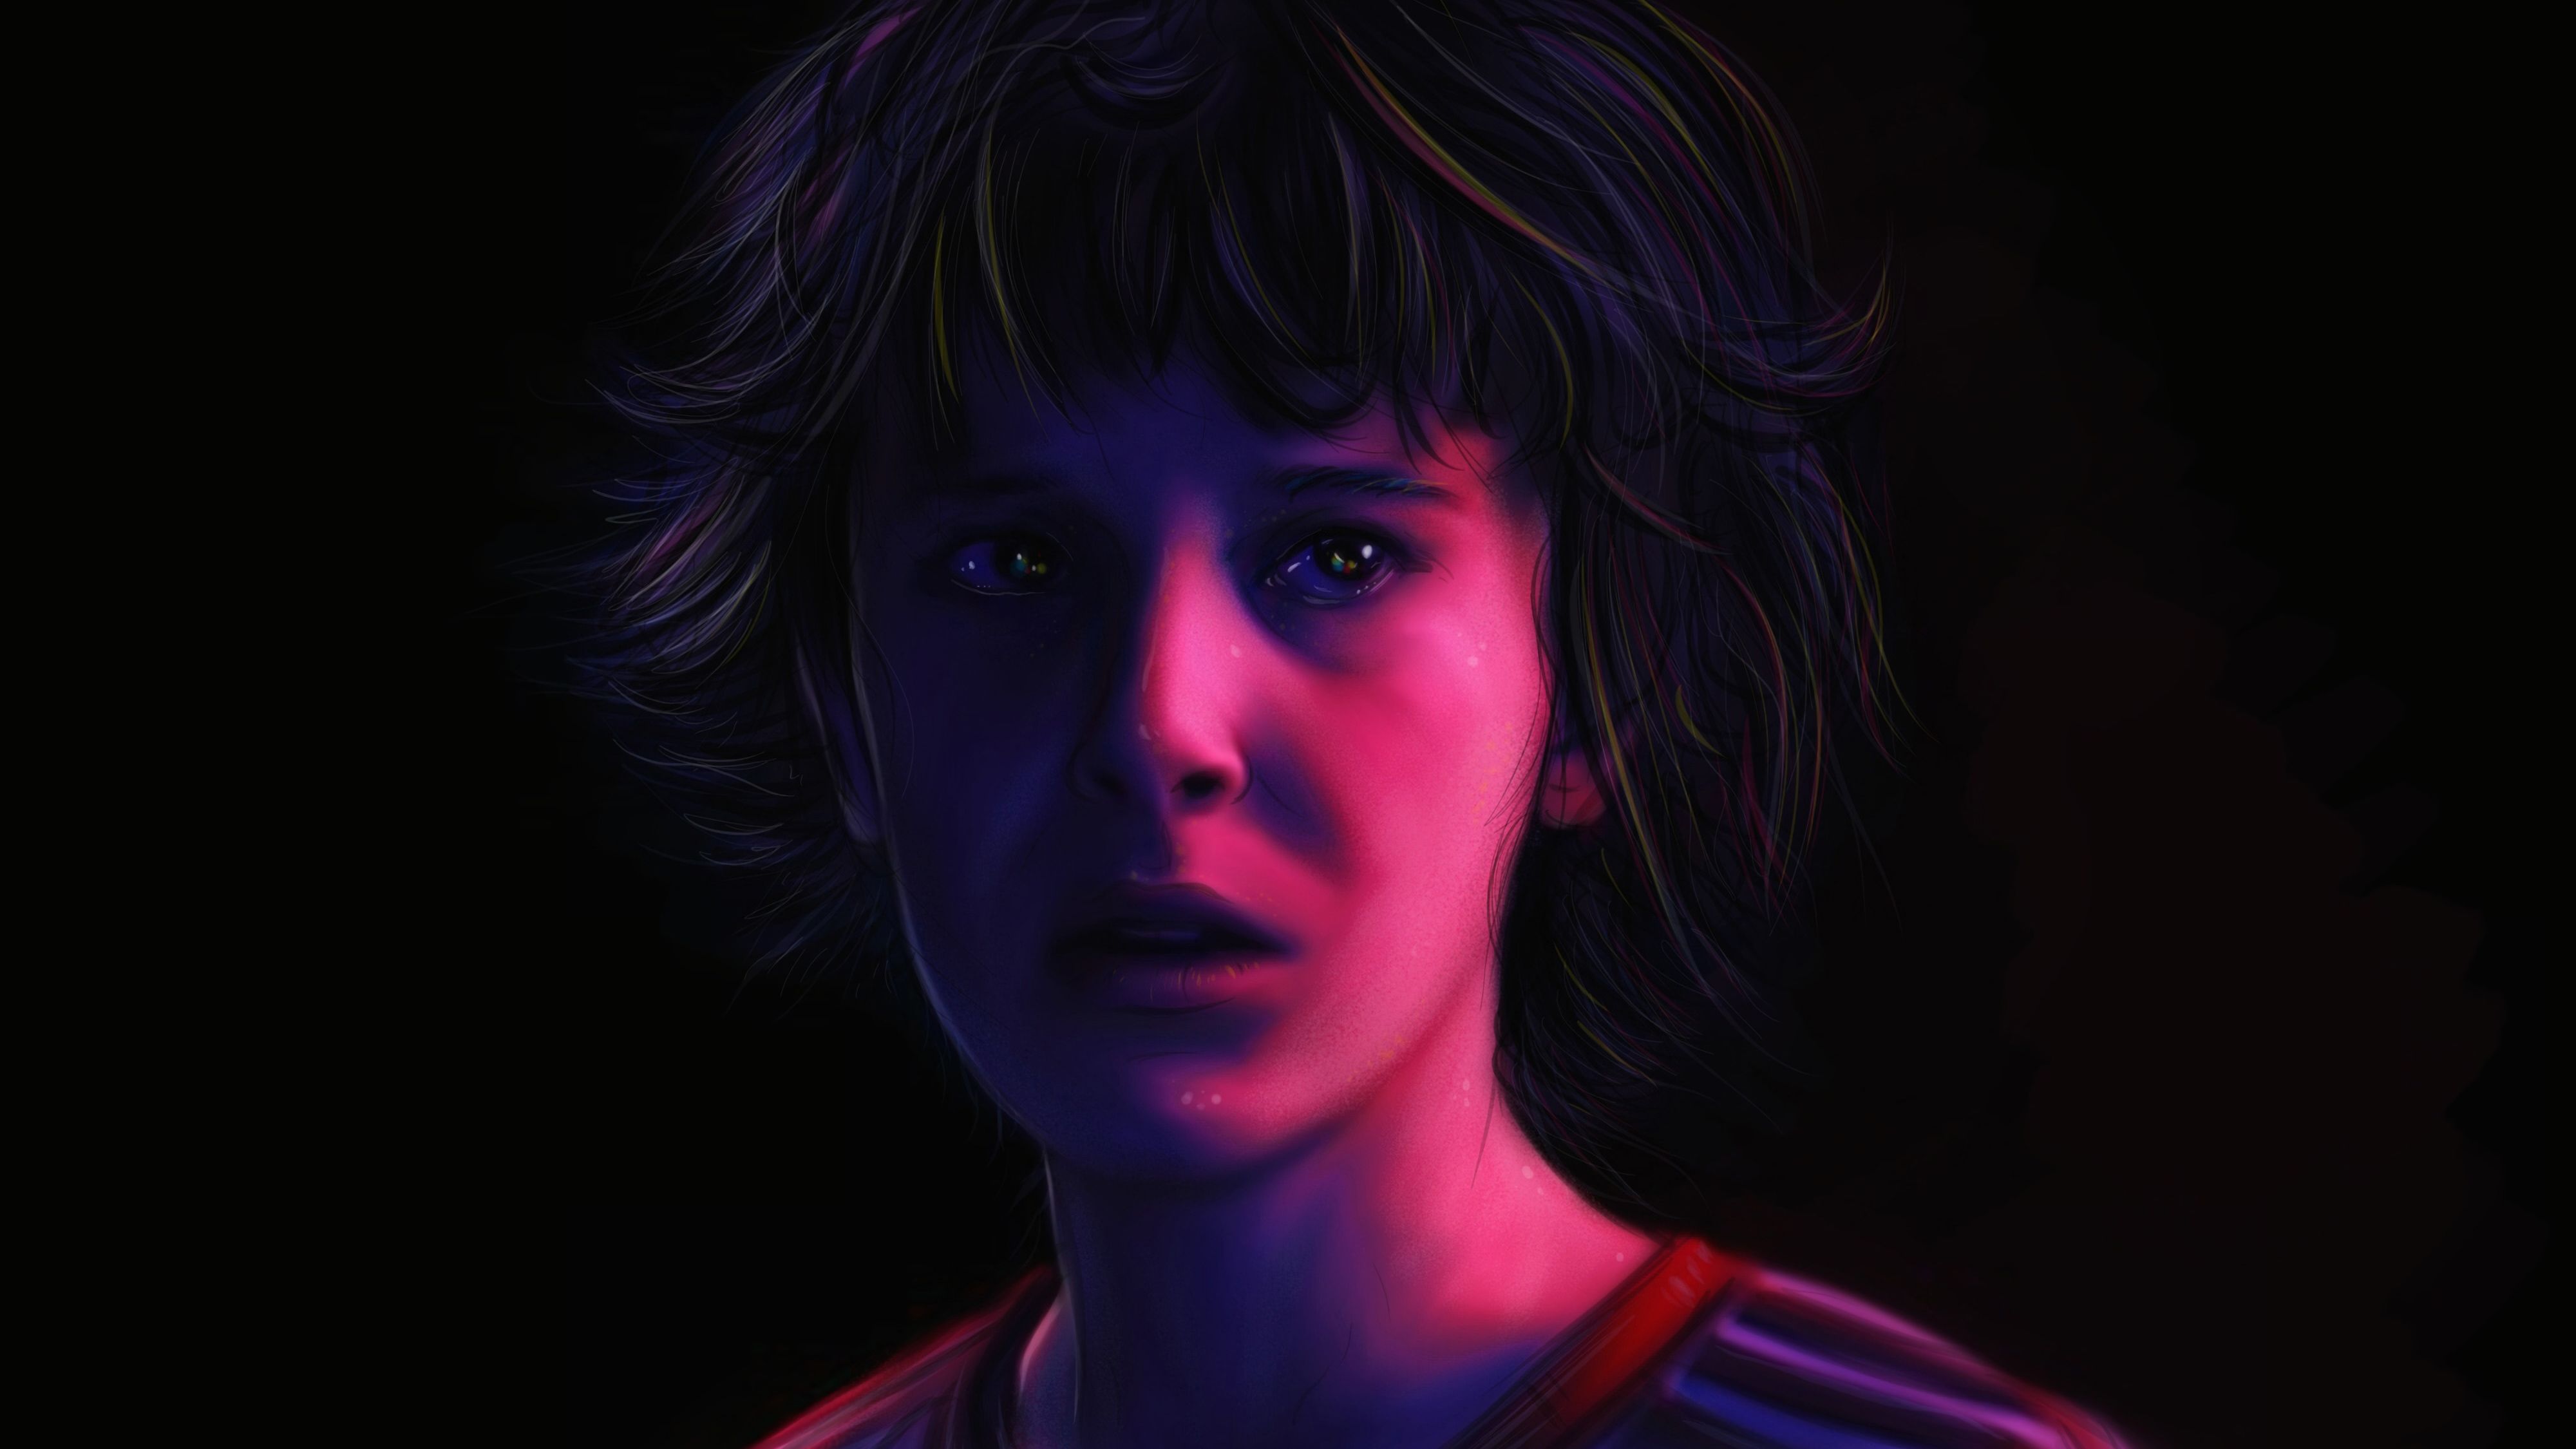 Stranger Things Eleven 4k Artwork New 1440P Resolution HD 4k Wallpaper, Image, Background, Photo and Picture